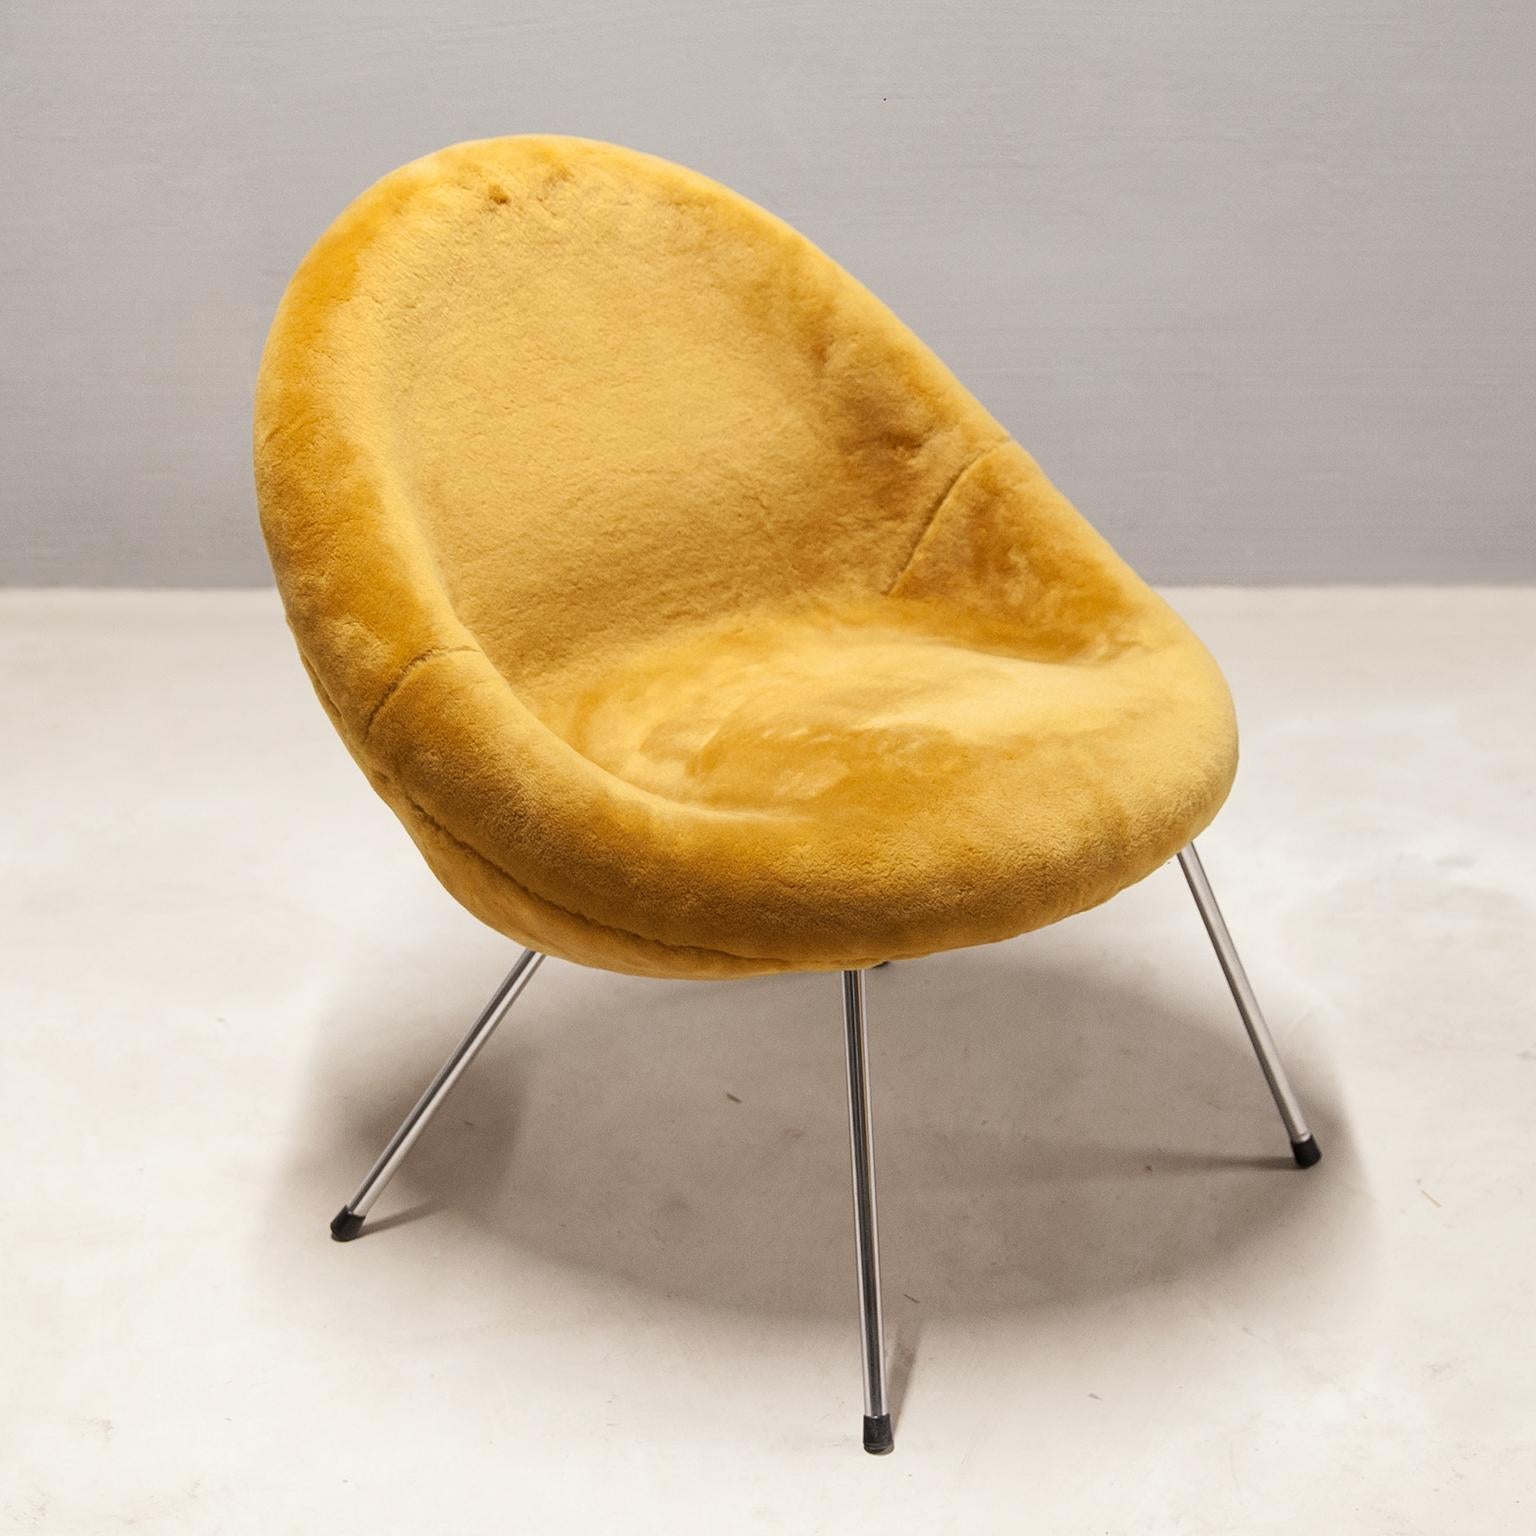 Monsieur armchair by Fritz Neth, Correcta Stizformbau edition in orange velour fabric, Germany 1950s. The seat and the back are moulded from the same piece and curved in an ergonomic shape which ensures comfort and aesthetics.
76 H x 66 W x 60 D cm